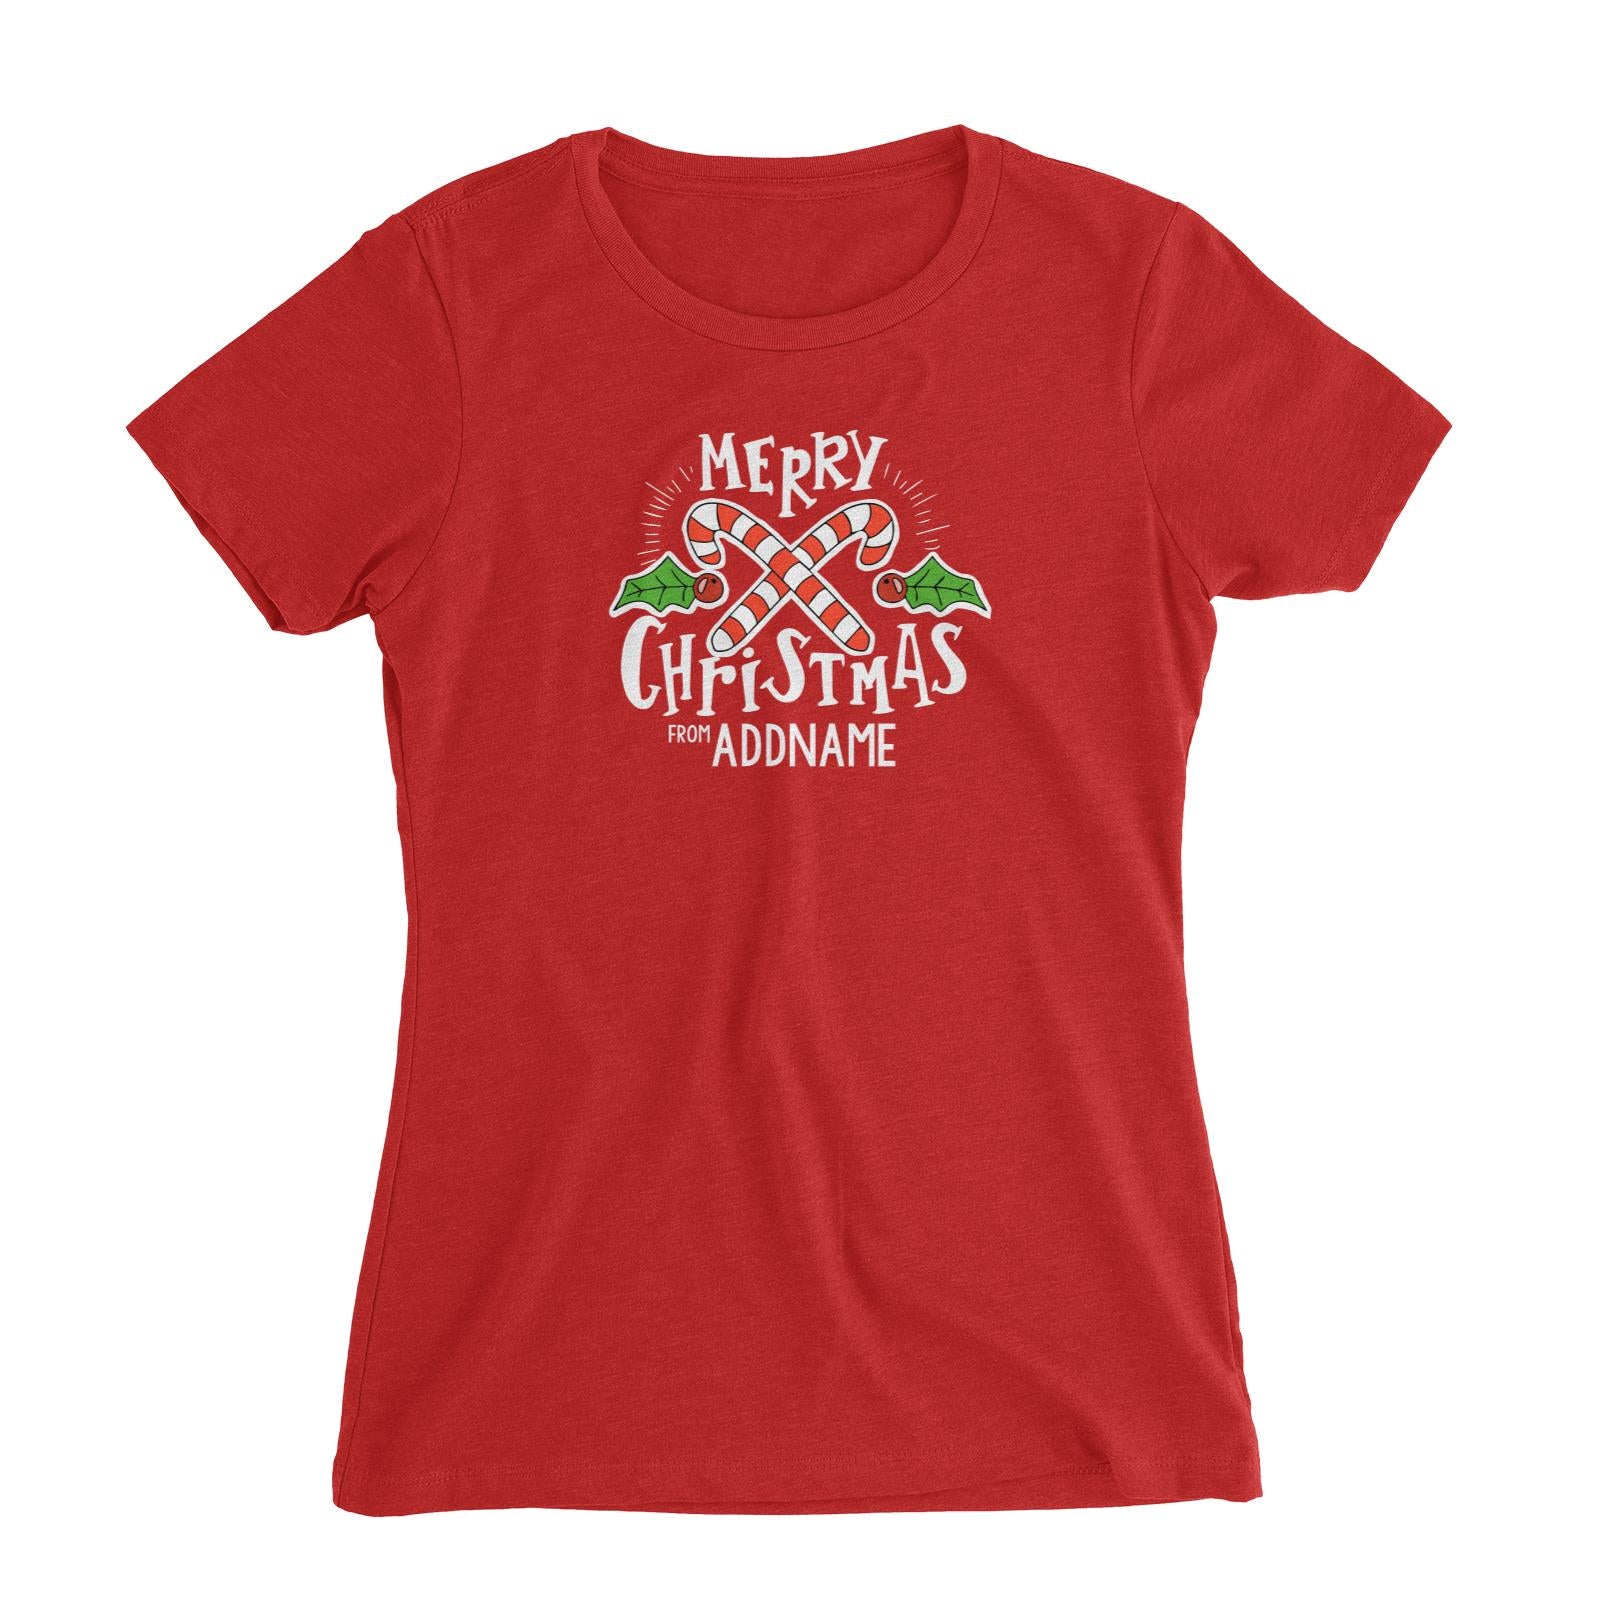 Merry Chrismas with Holly and Candy Cane Greeting Addname Women's Slim Fit T-Shirt Christmas Matching Family Personalizable Designs Lettering